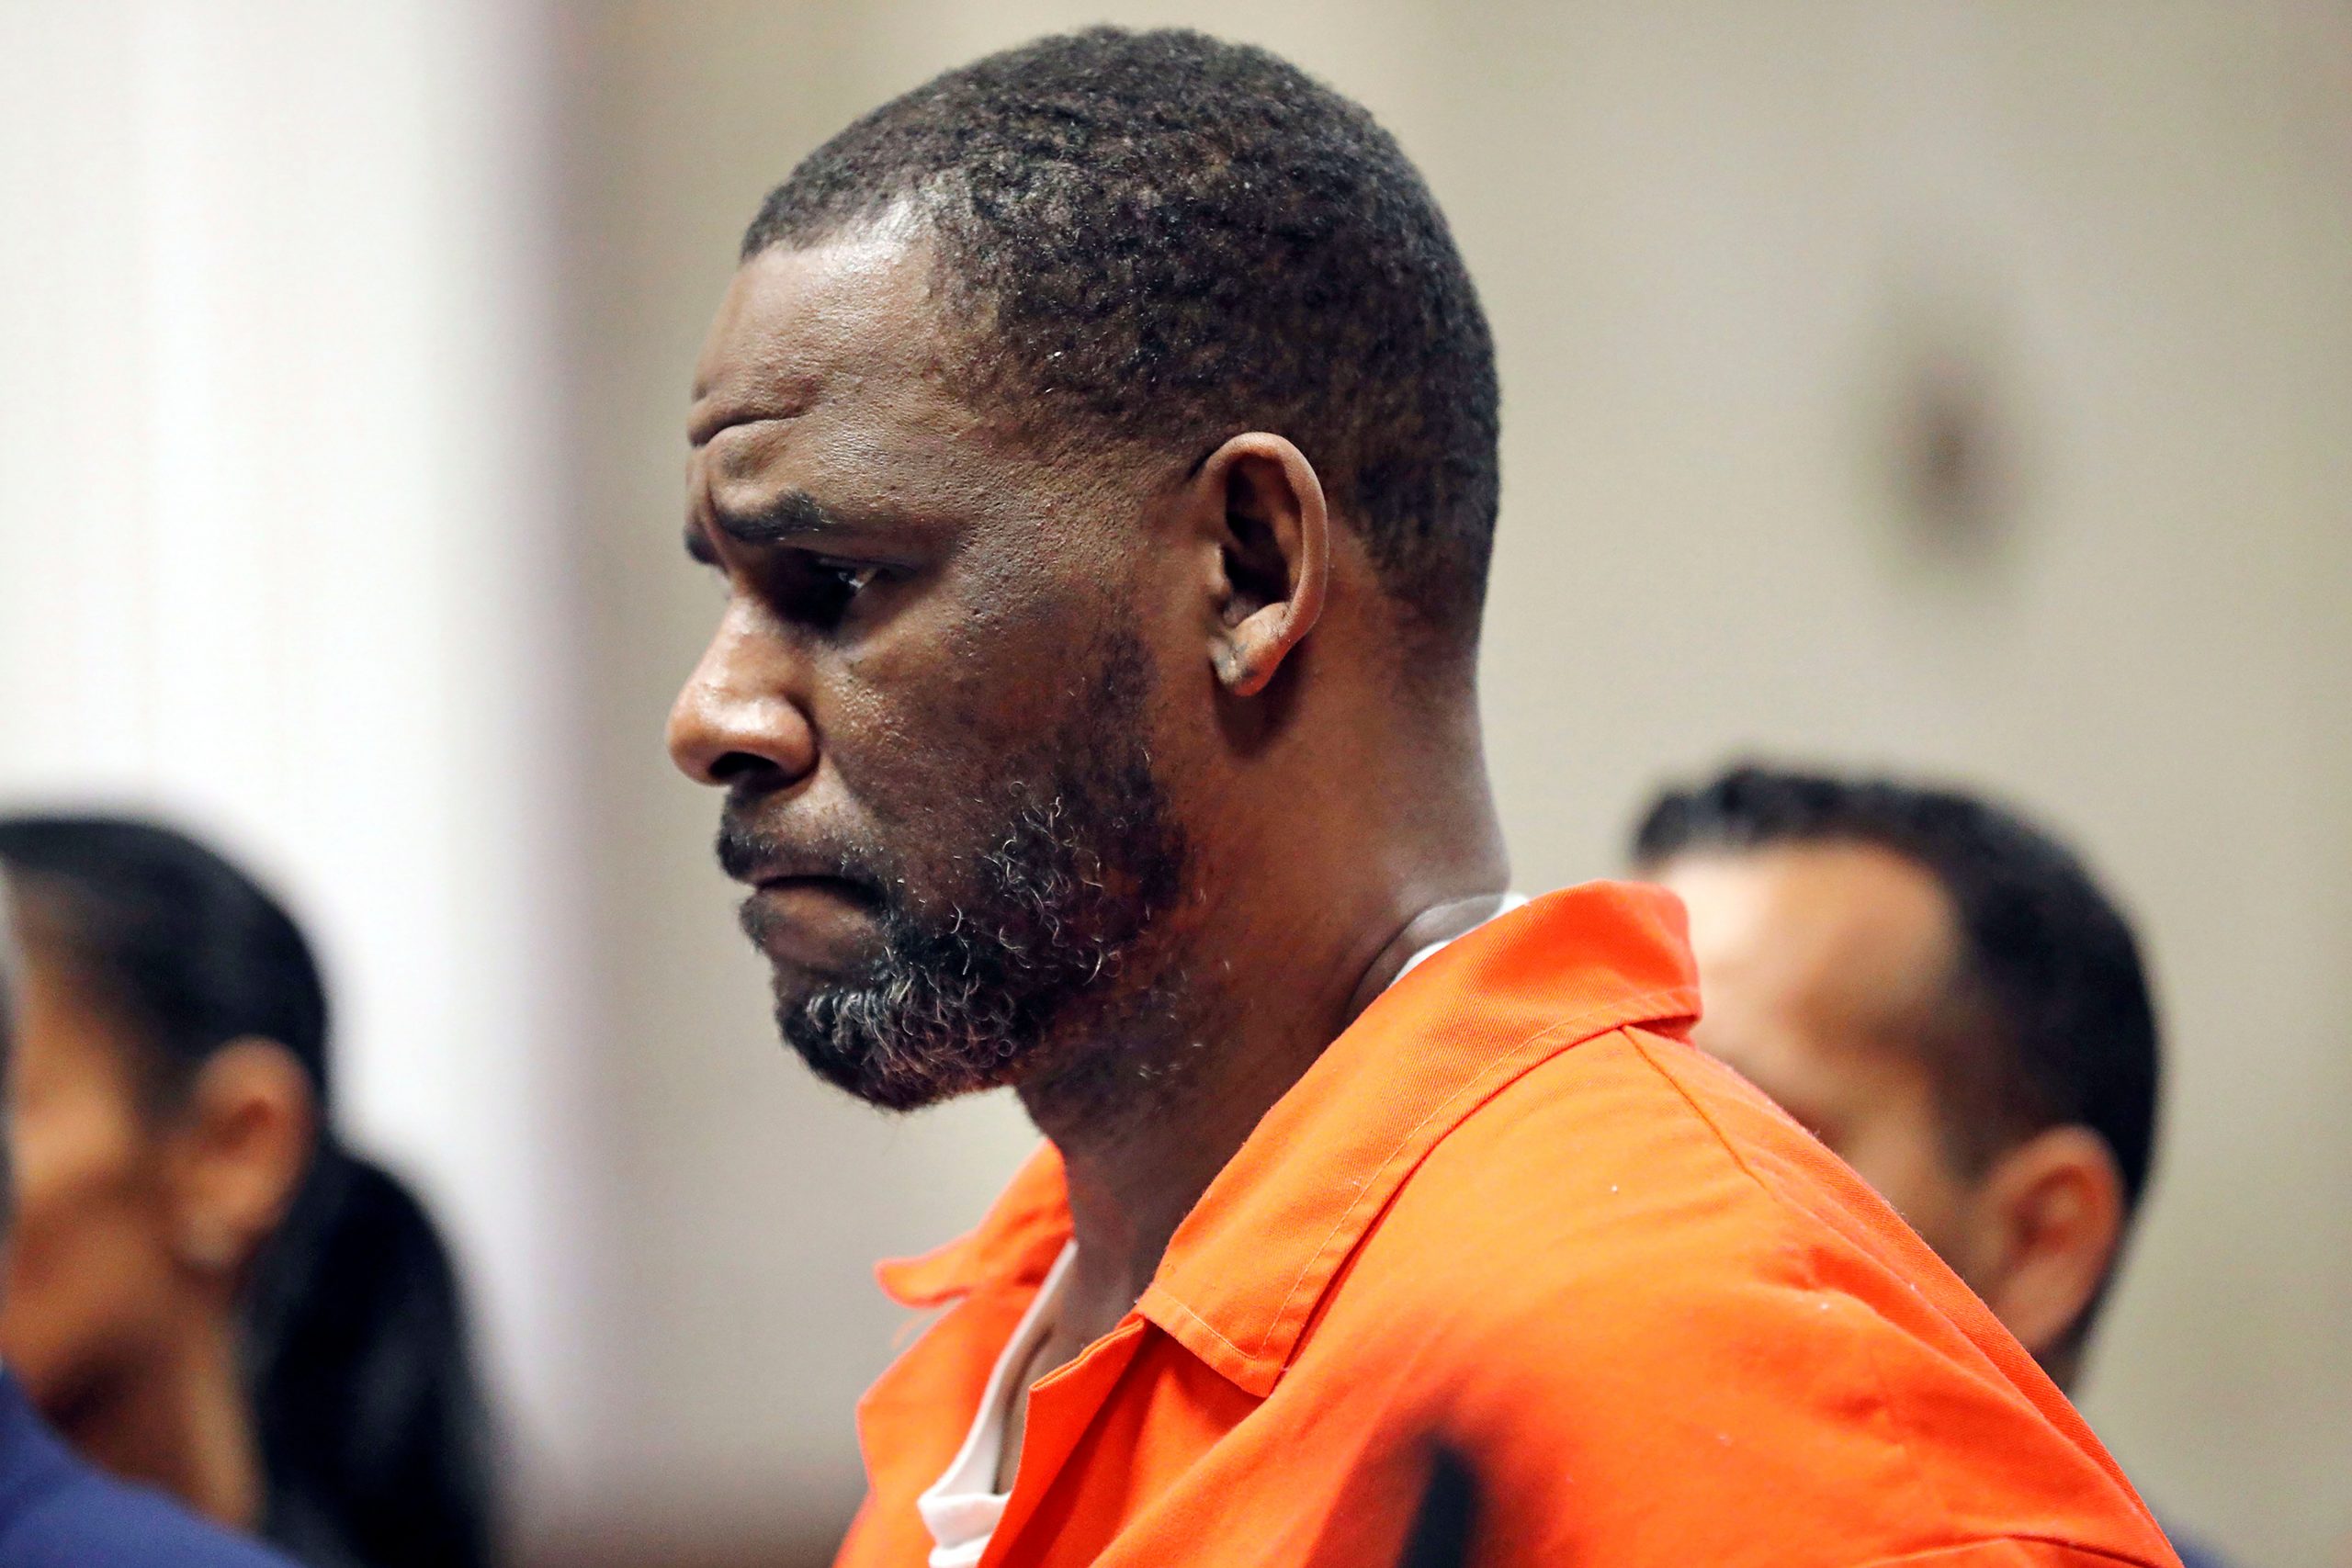 R Kelly, R&B legend, sentenced to 30 years in prison for child sex abuse